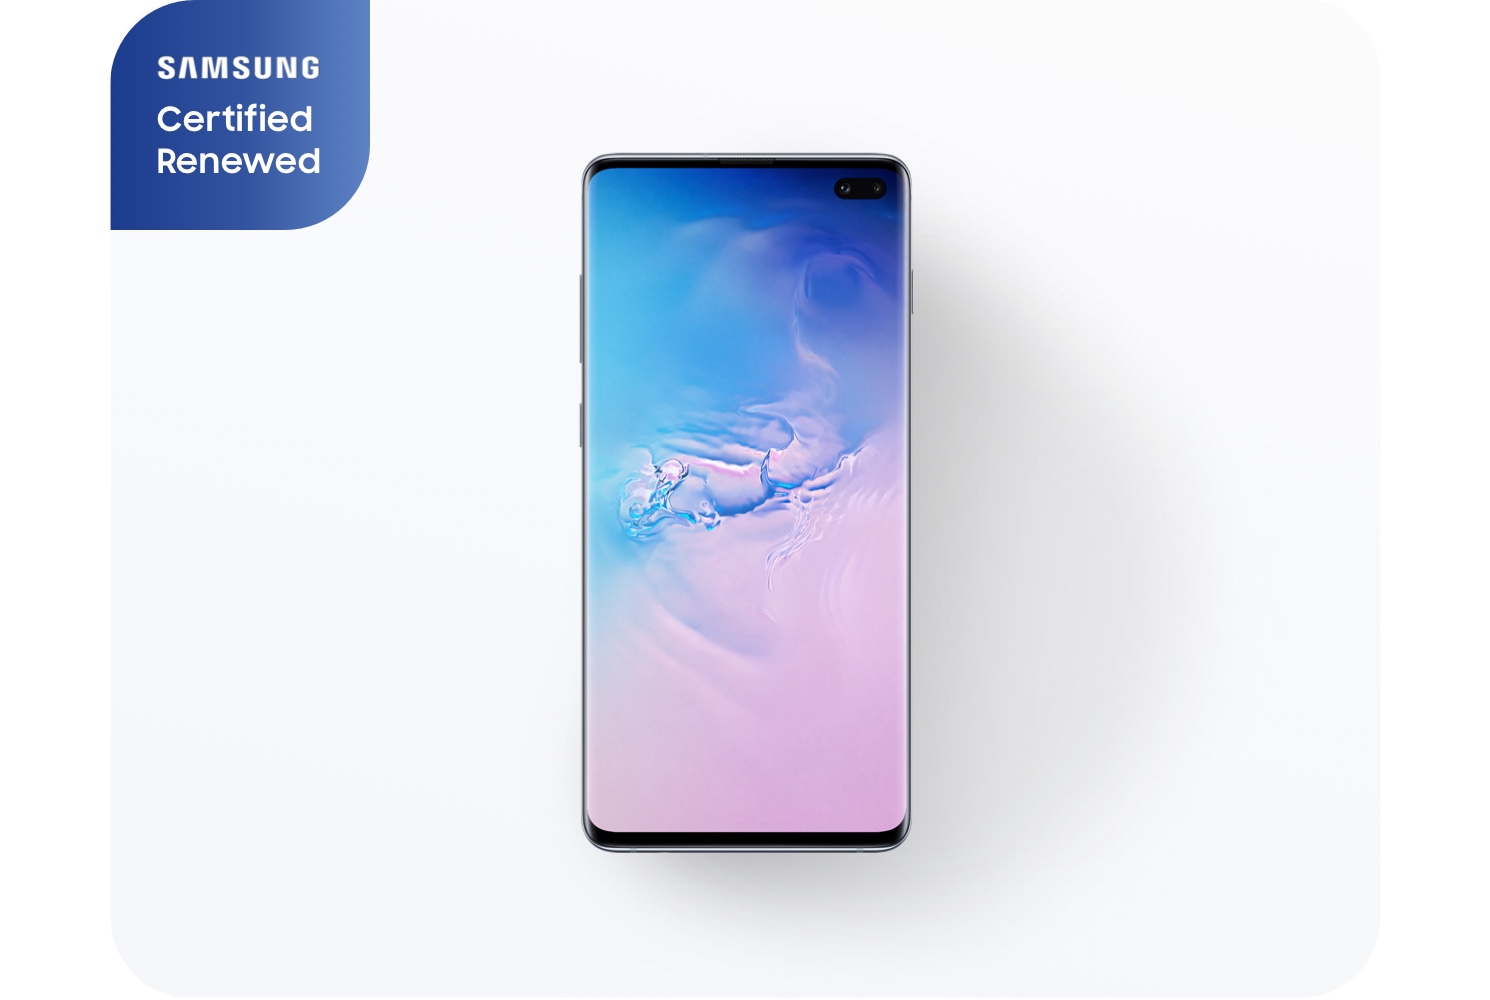 Galaxy S10 for business